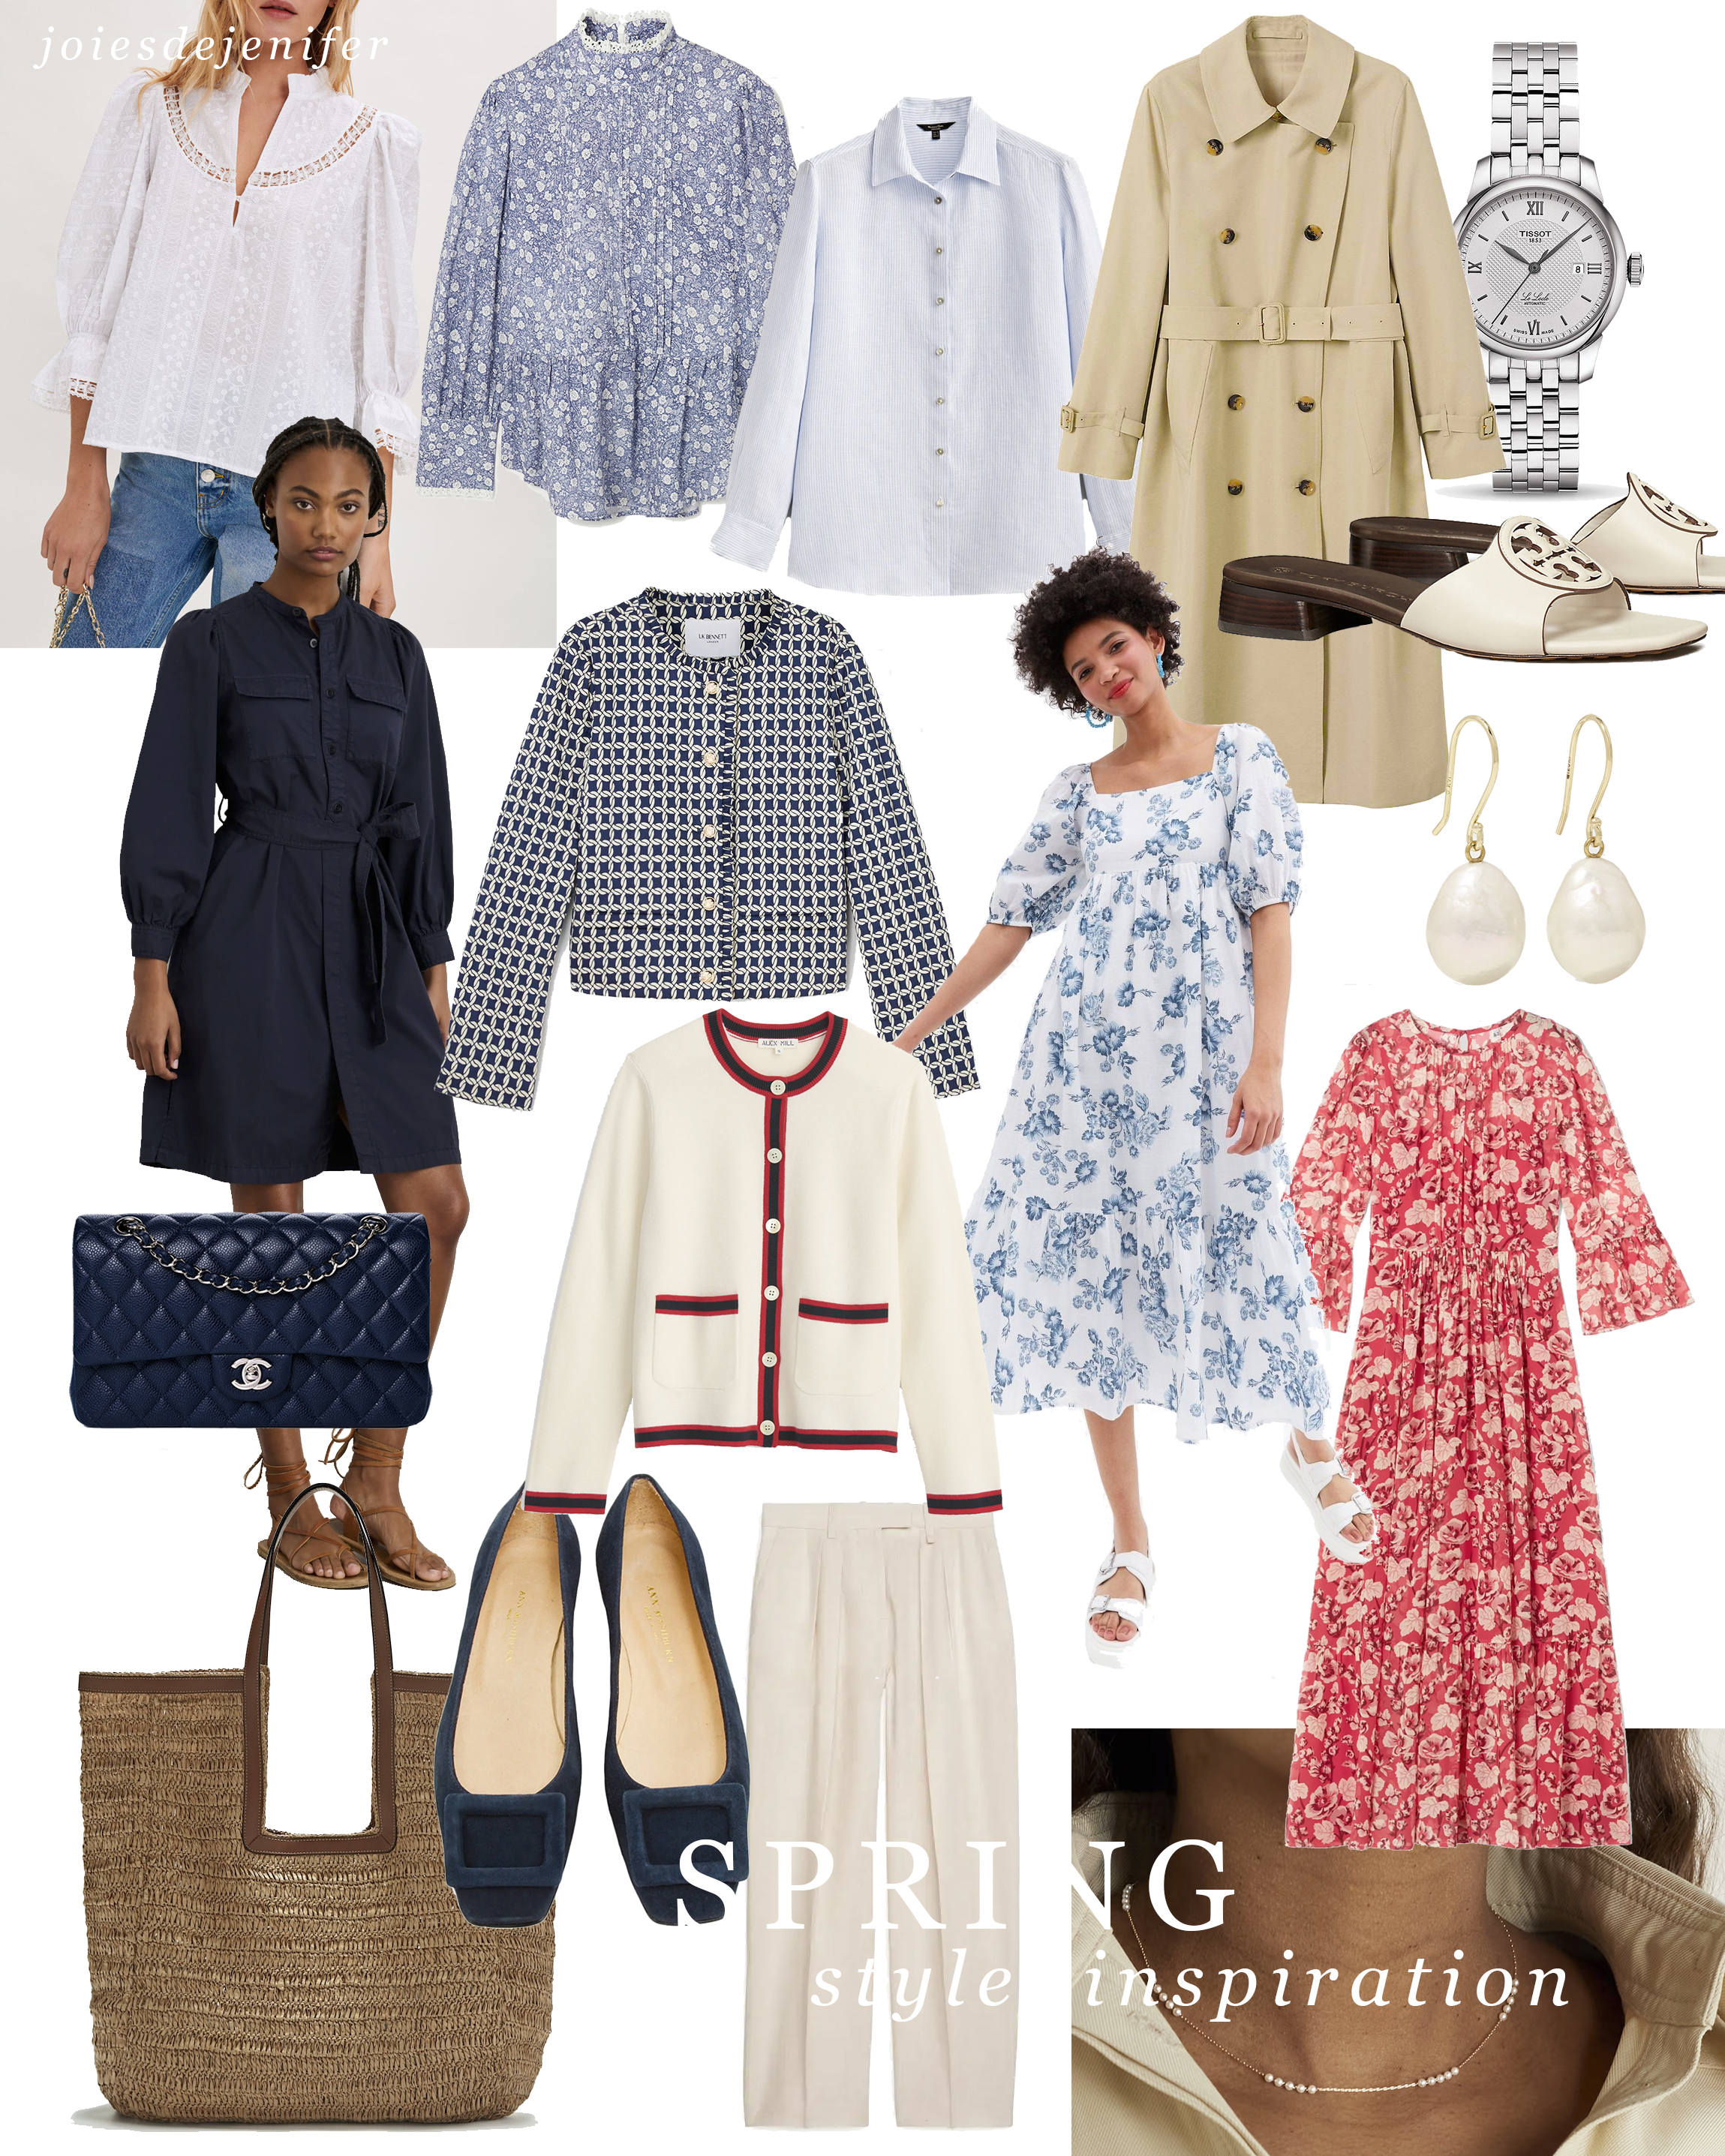 Spring-classic-style-inspiration-2022